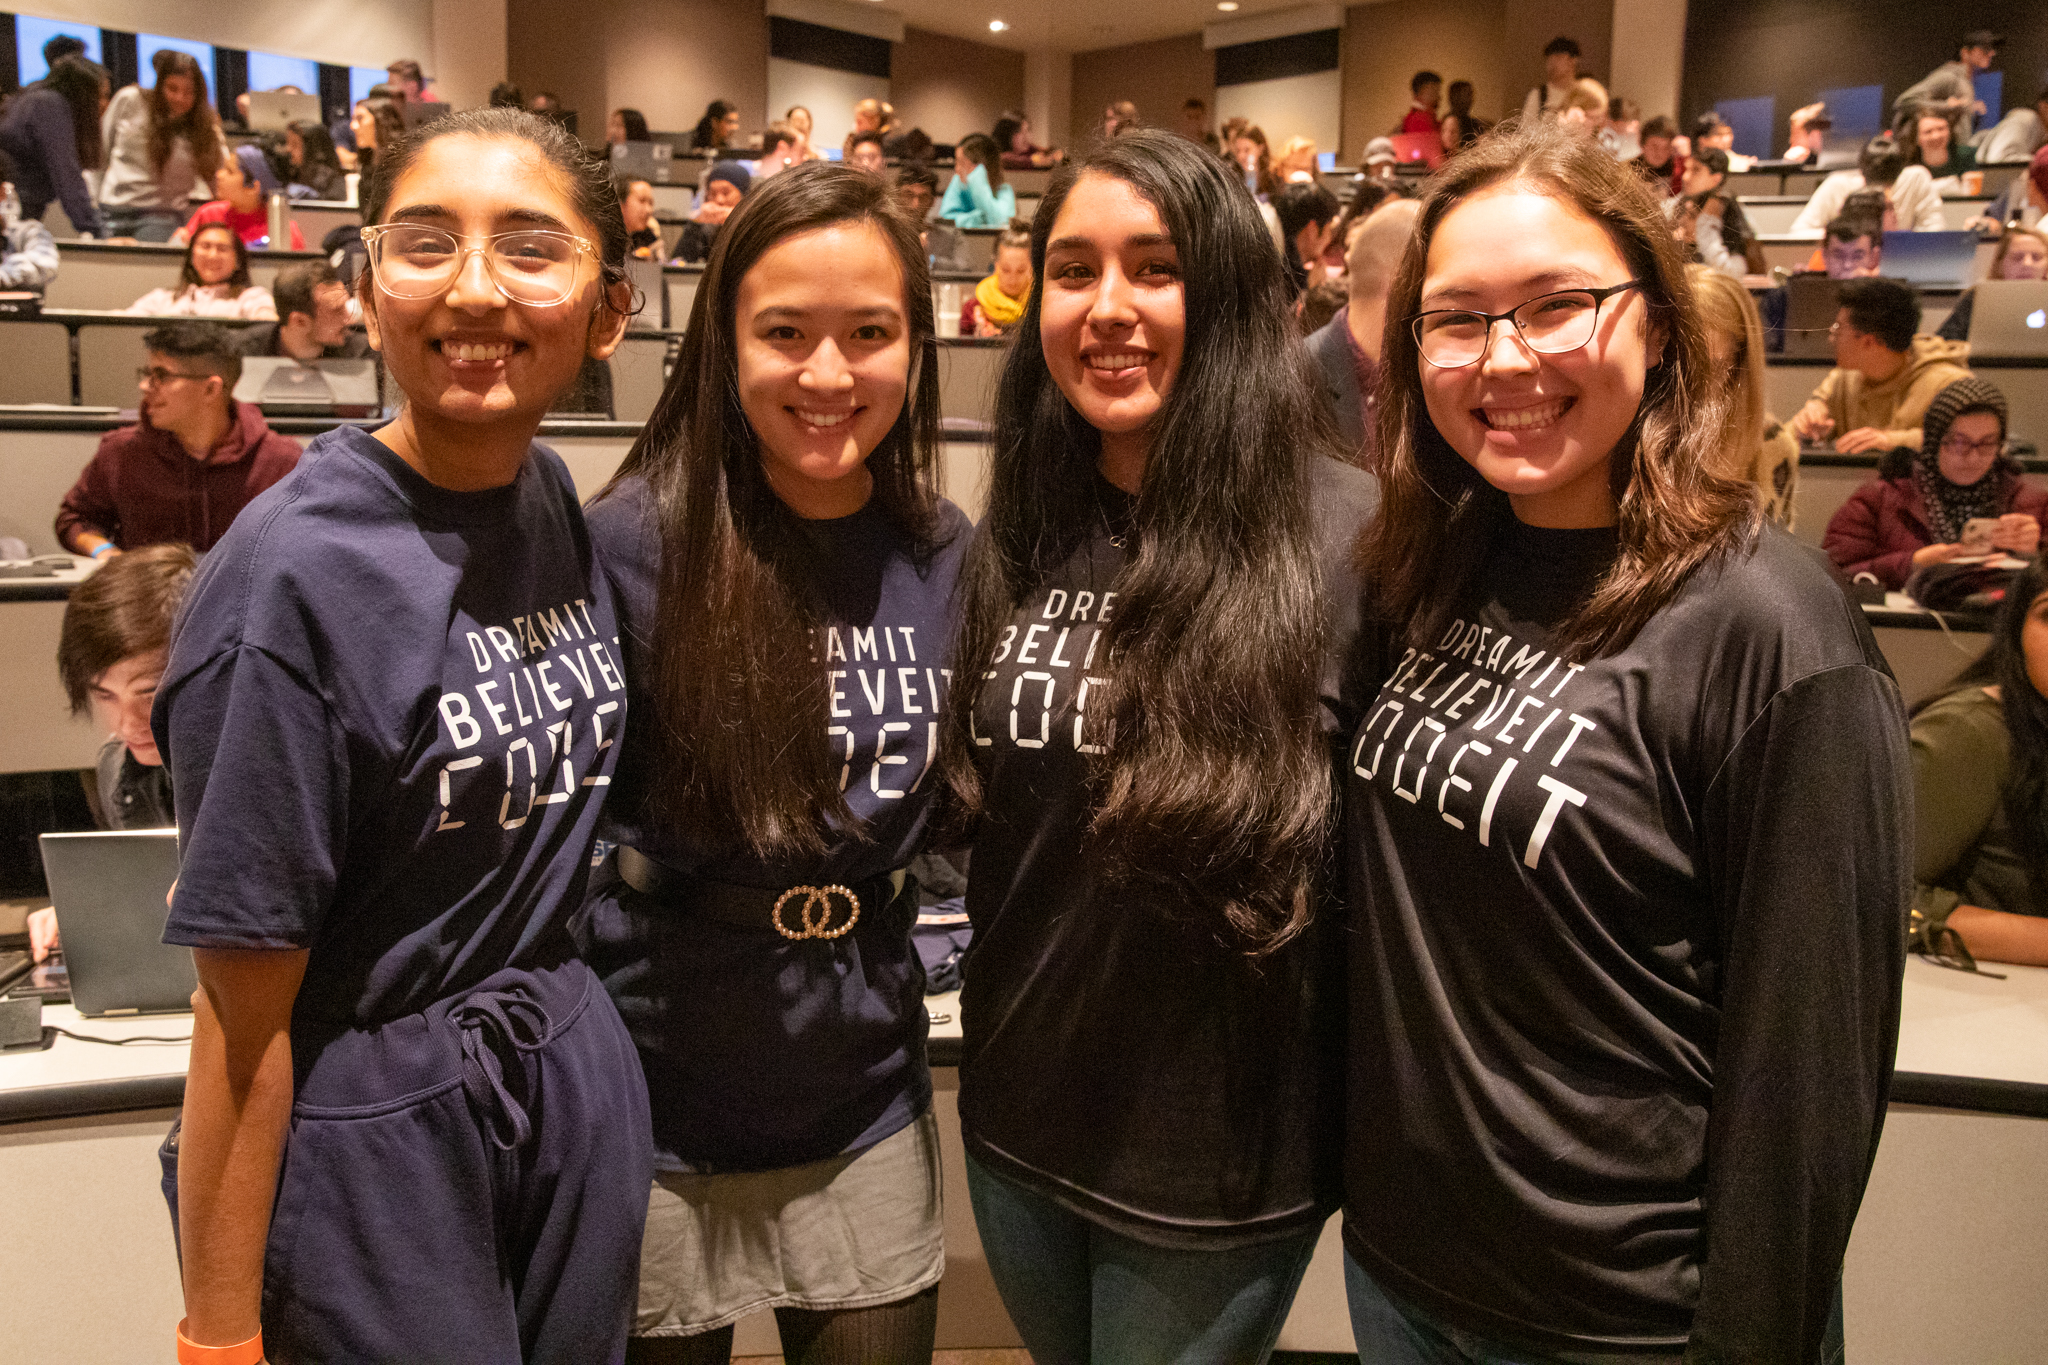 Four students stand for a group photo at a hacking event.